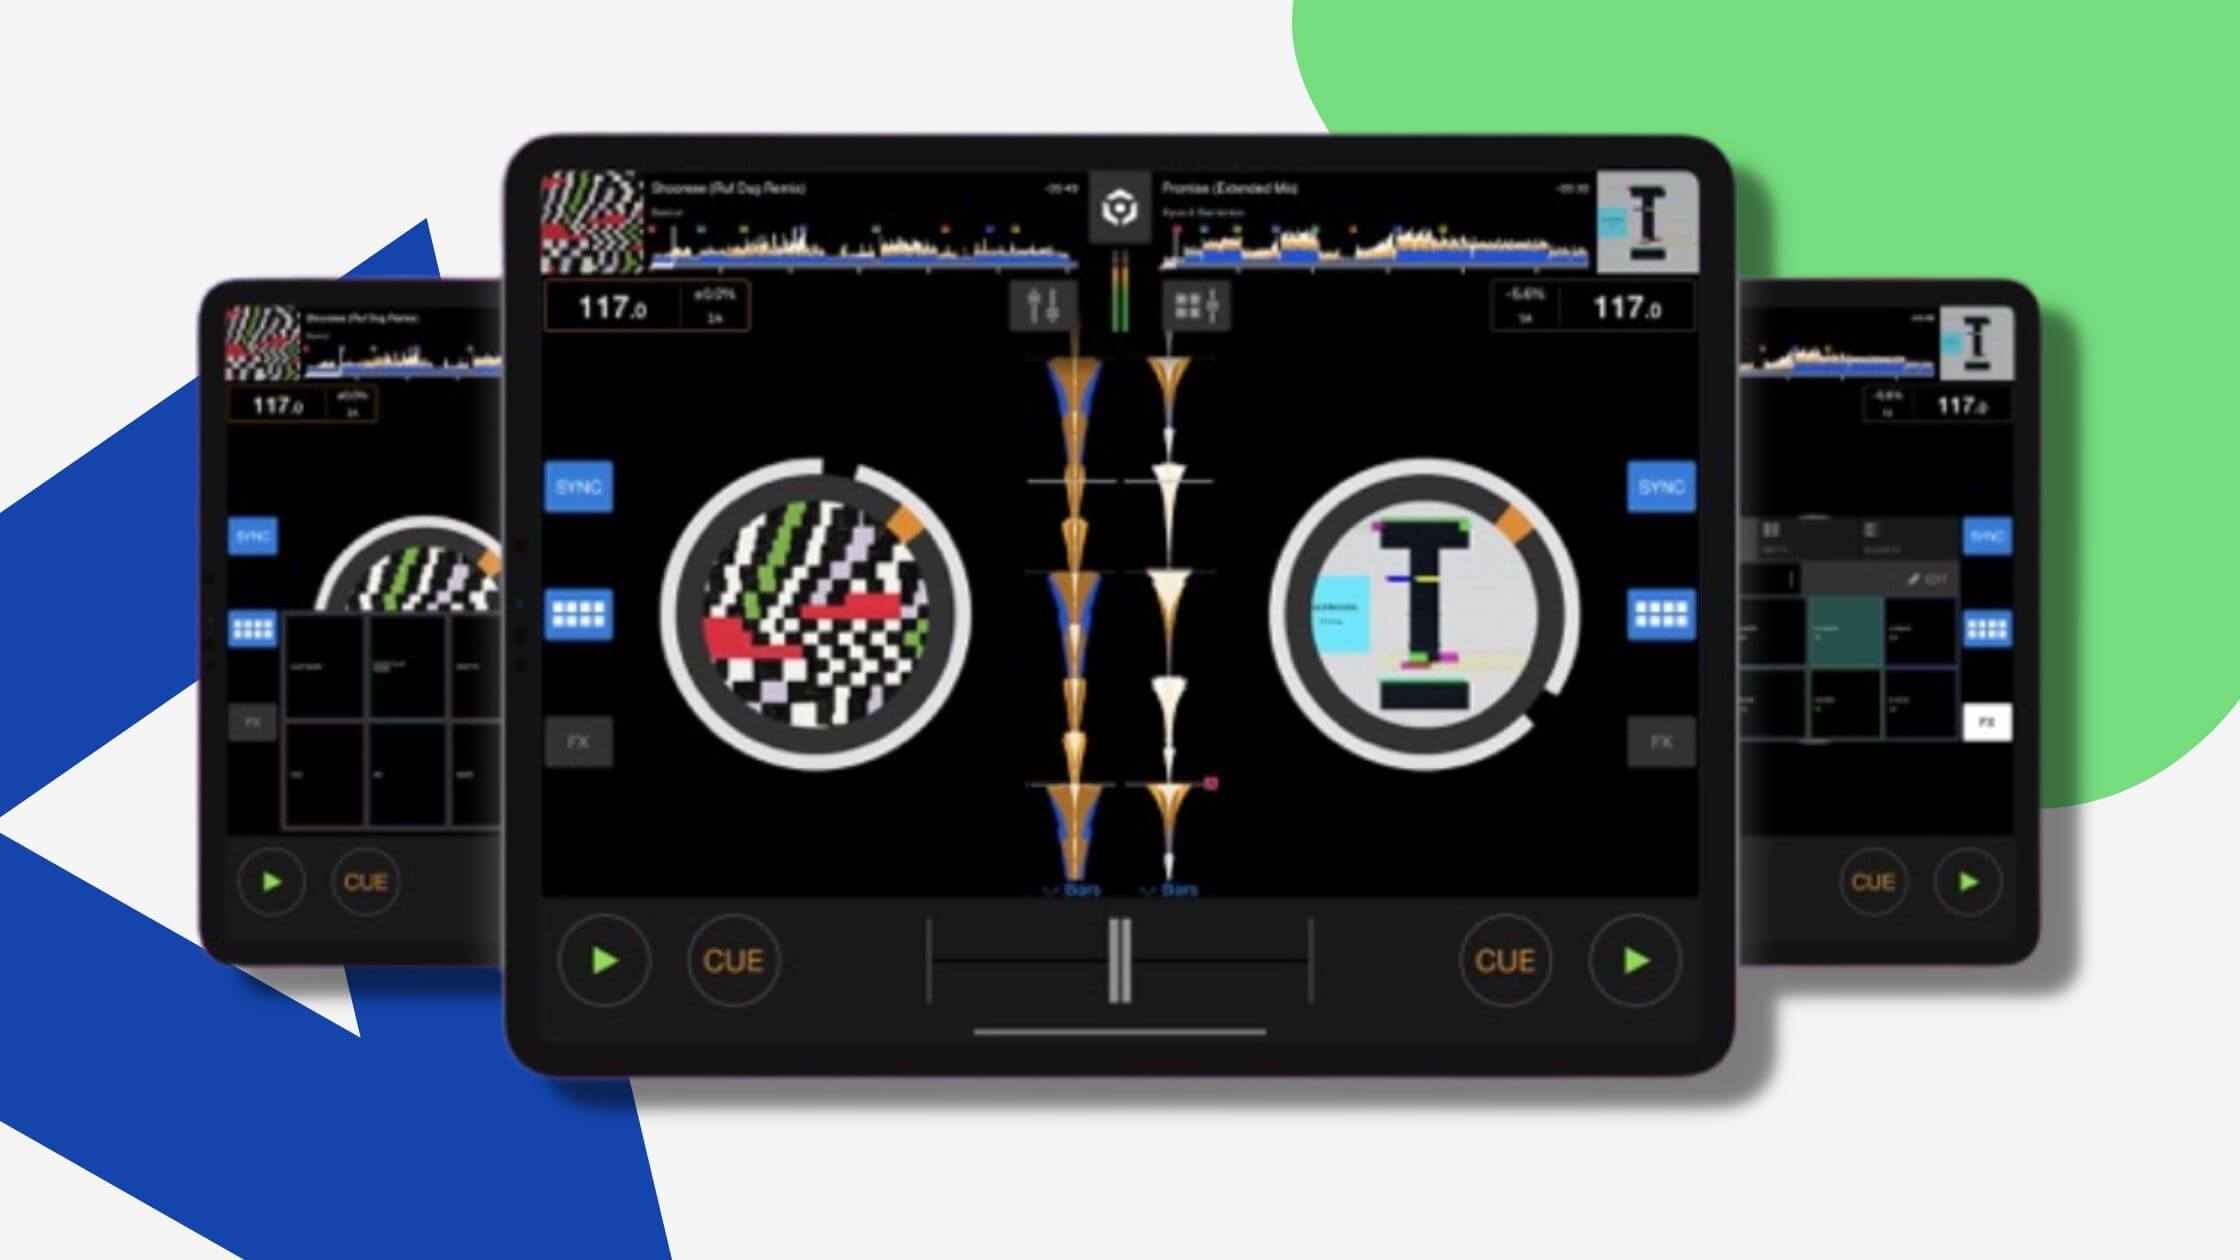 rekordbox for iOS update – ver. 4.0 brings new features and connectivity for DJ’s on iPhone & iPad